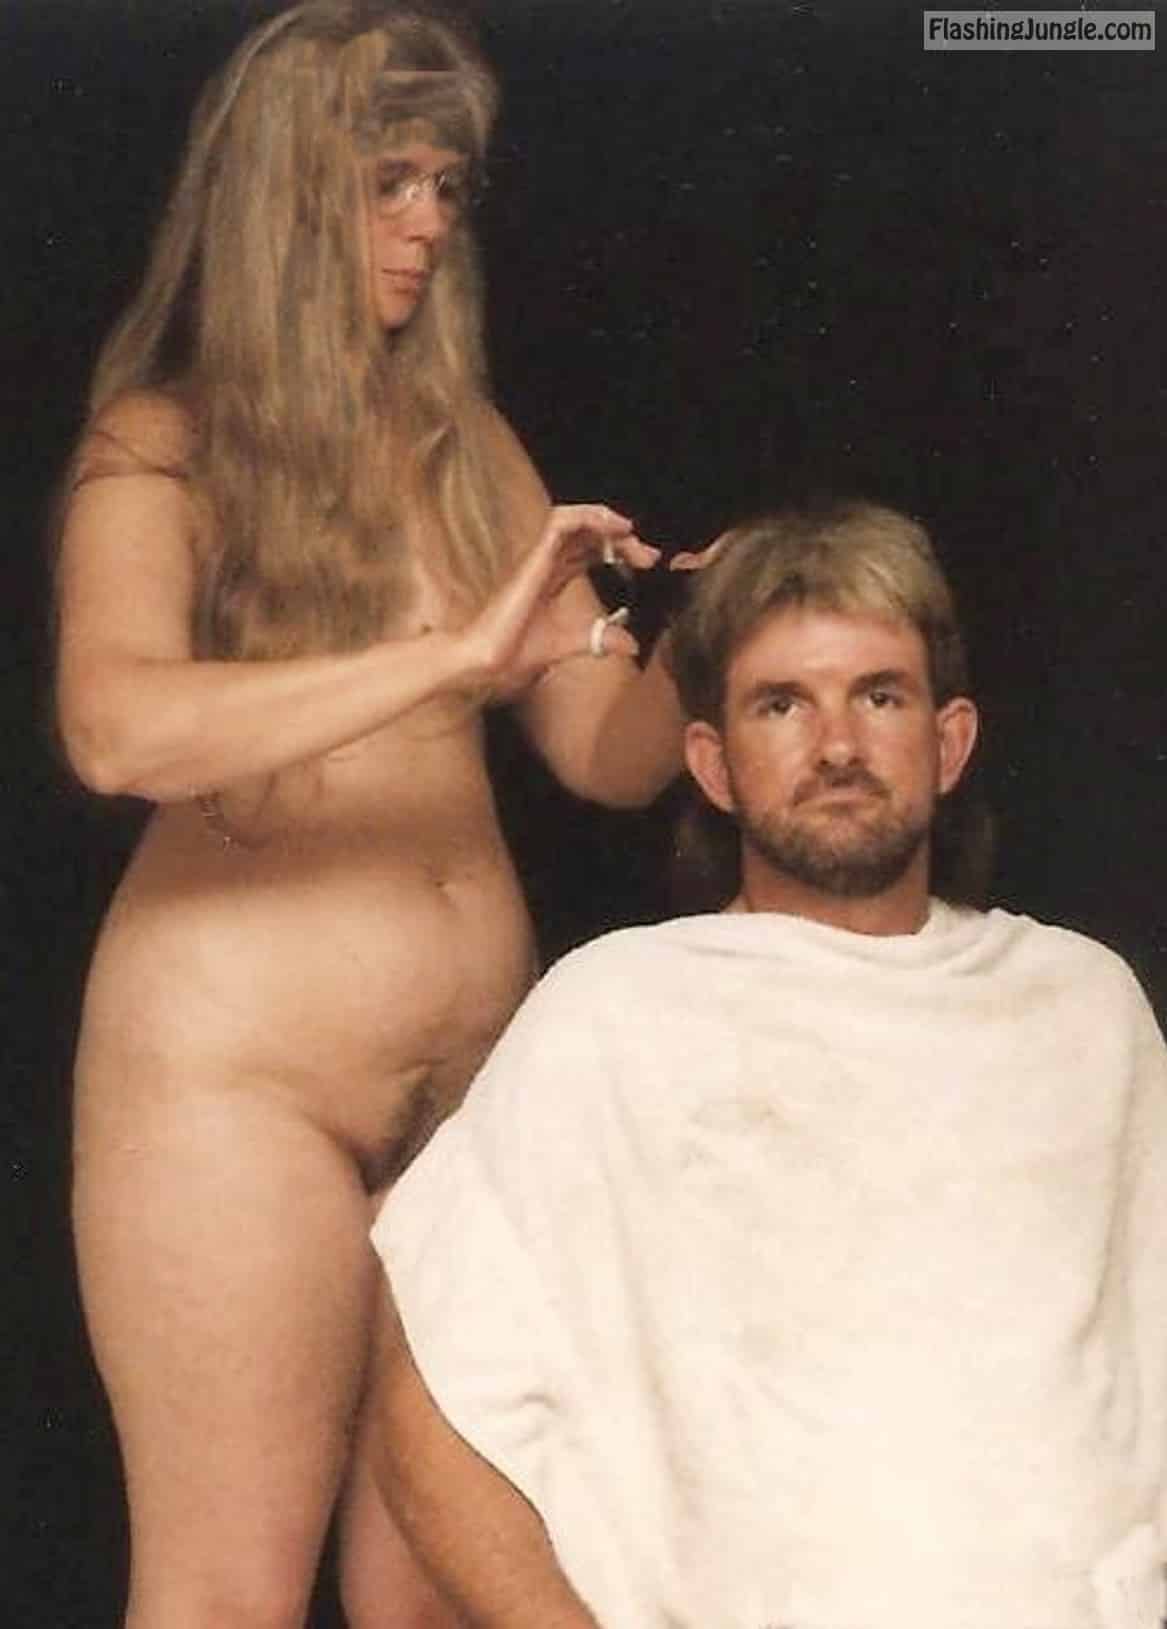 Real Amateurs  : nude moms trim tumblr Getting a Trim From Naked Woman